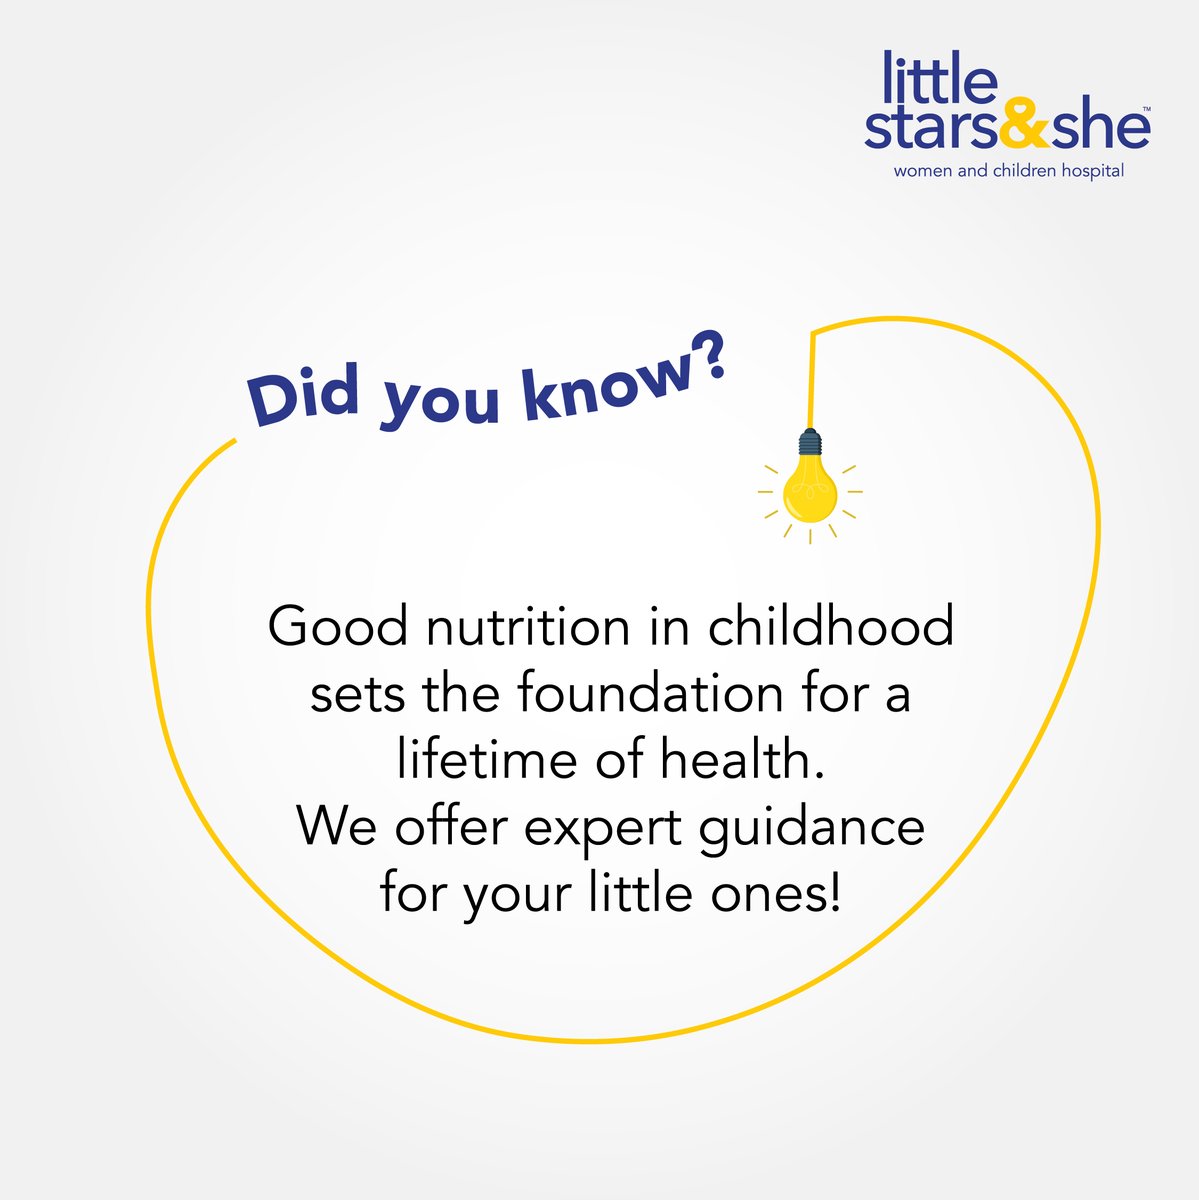 Your child's health starts with good nutrition in childhood. Let us help you provide expert guidance for your little ones!

#littlestarsandshe #DidYouKnow #goodnutritioniskey #nutritionmatters #ChildrensCare #WomensCare #Healthcare #Childbirth #Gynaecology #Pediatric